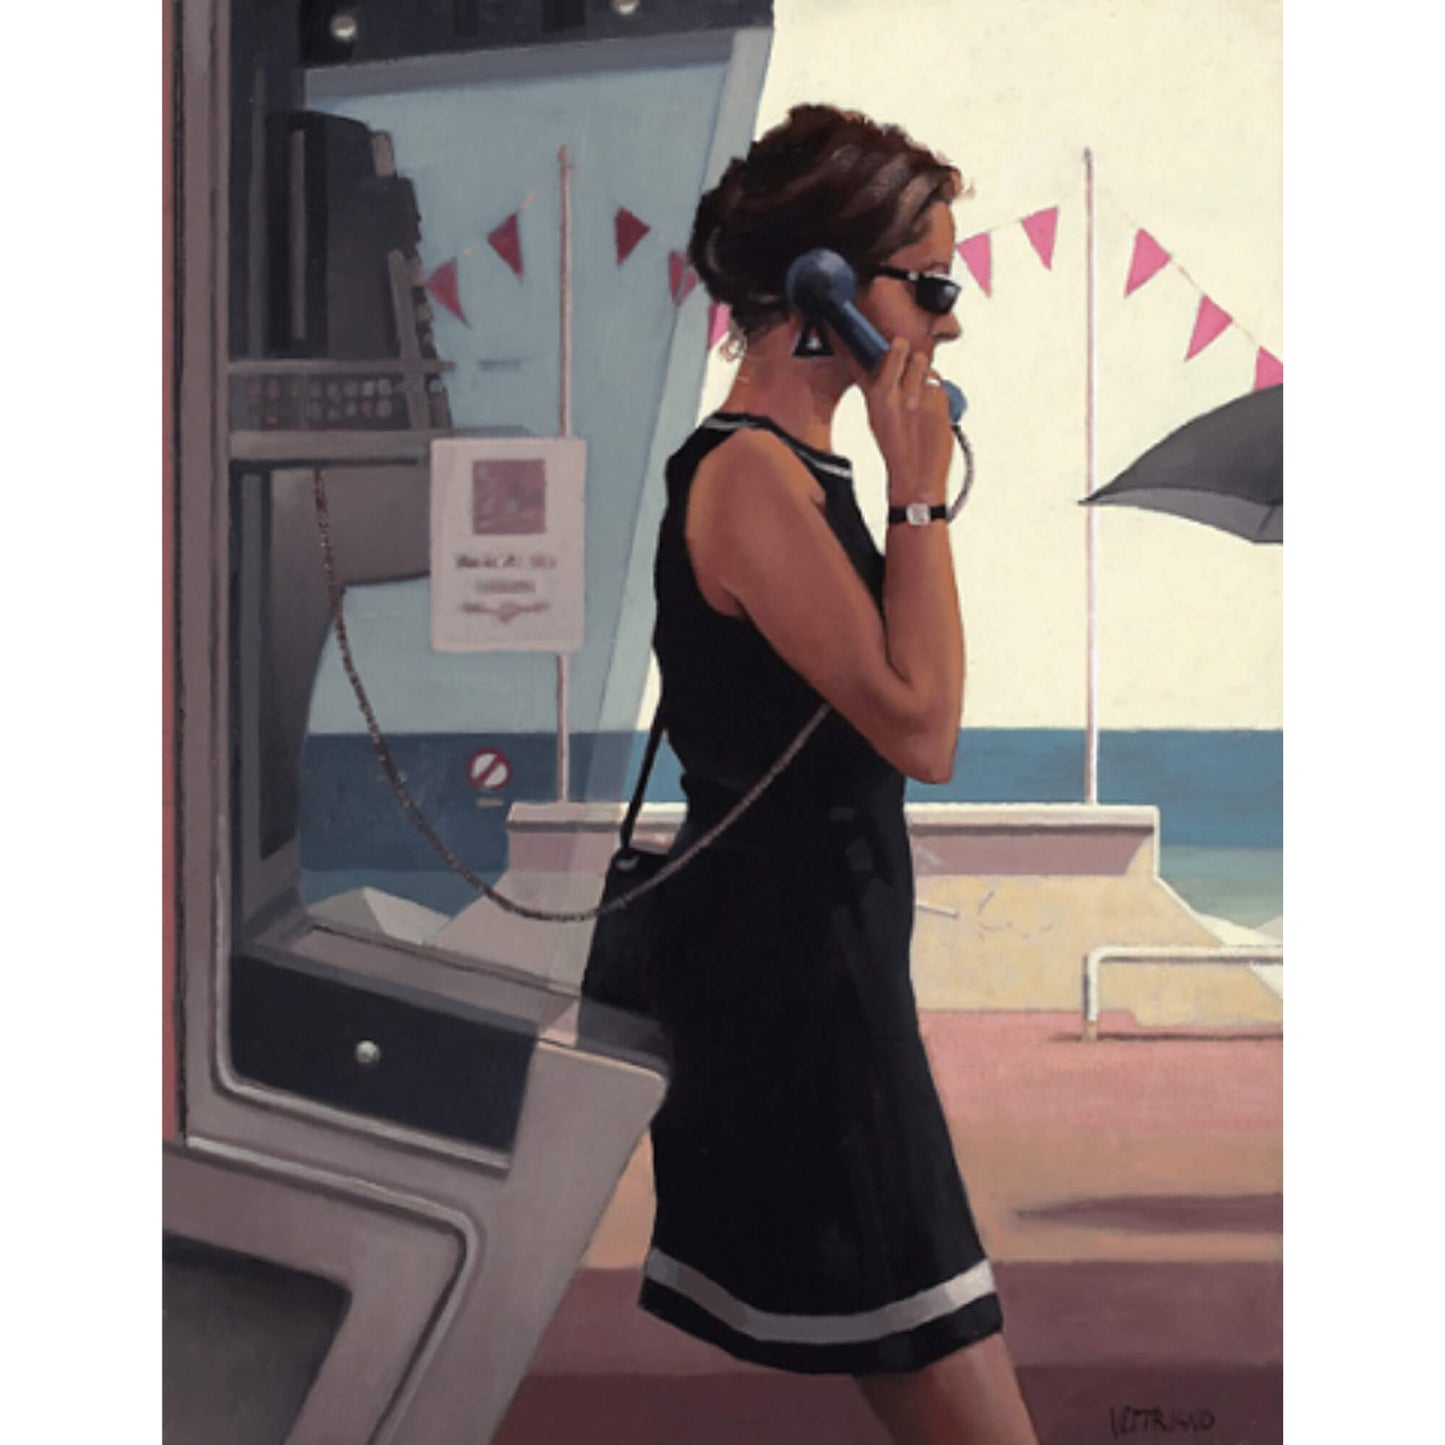 Load image into Gallery viewer, Her Secret Life Limited Edition Print Jack Vettriano
